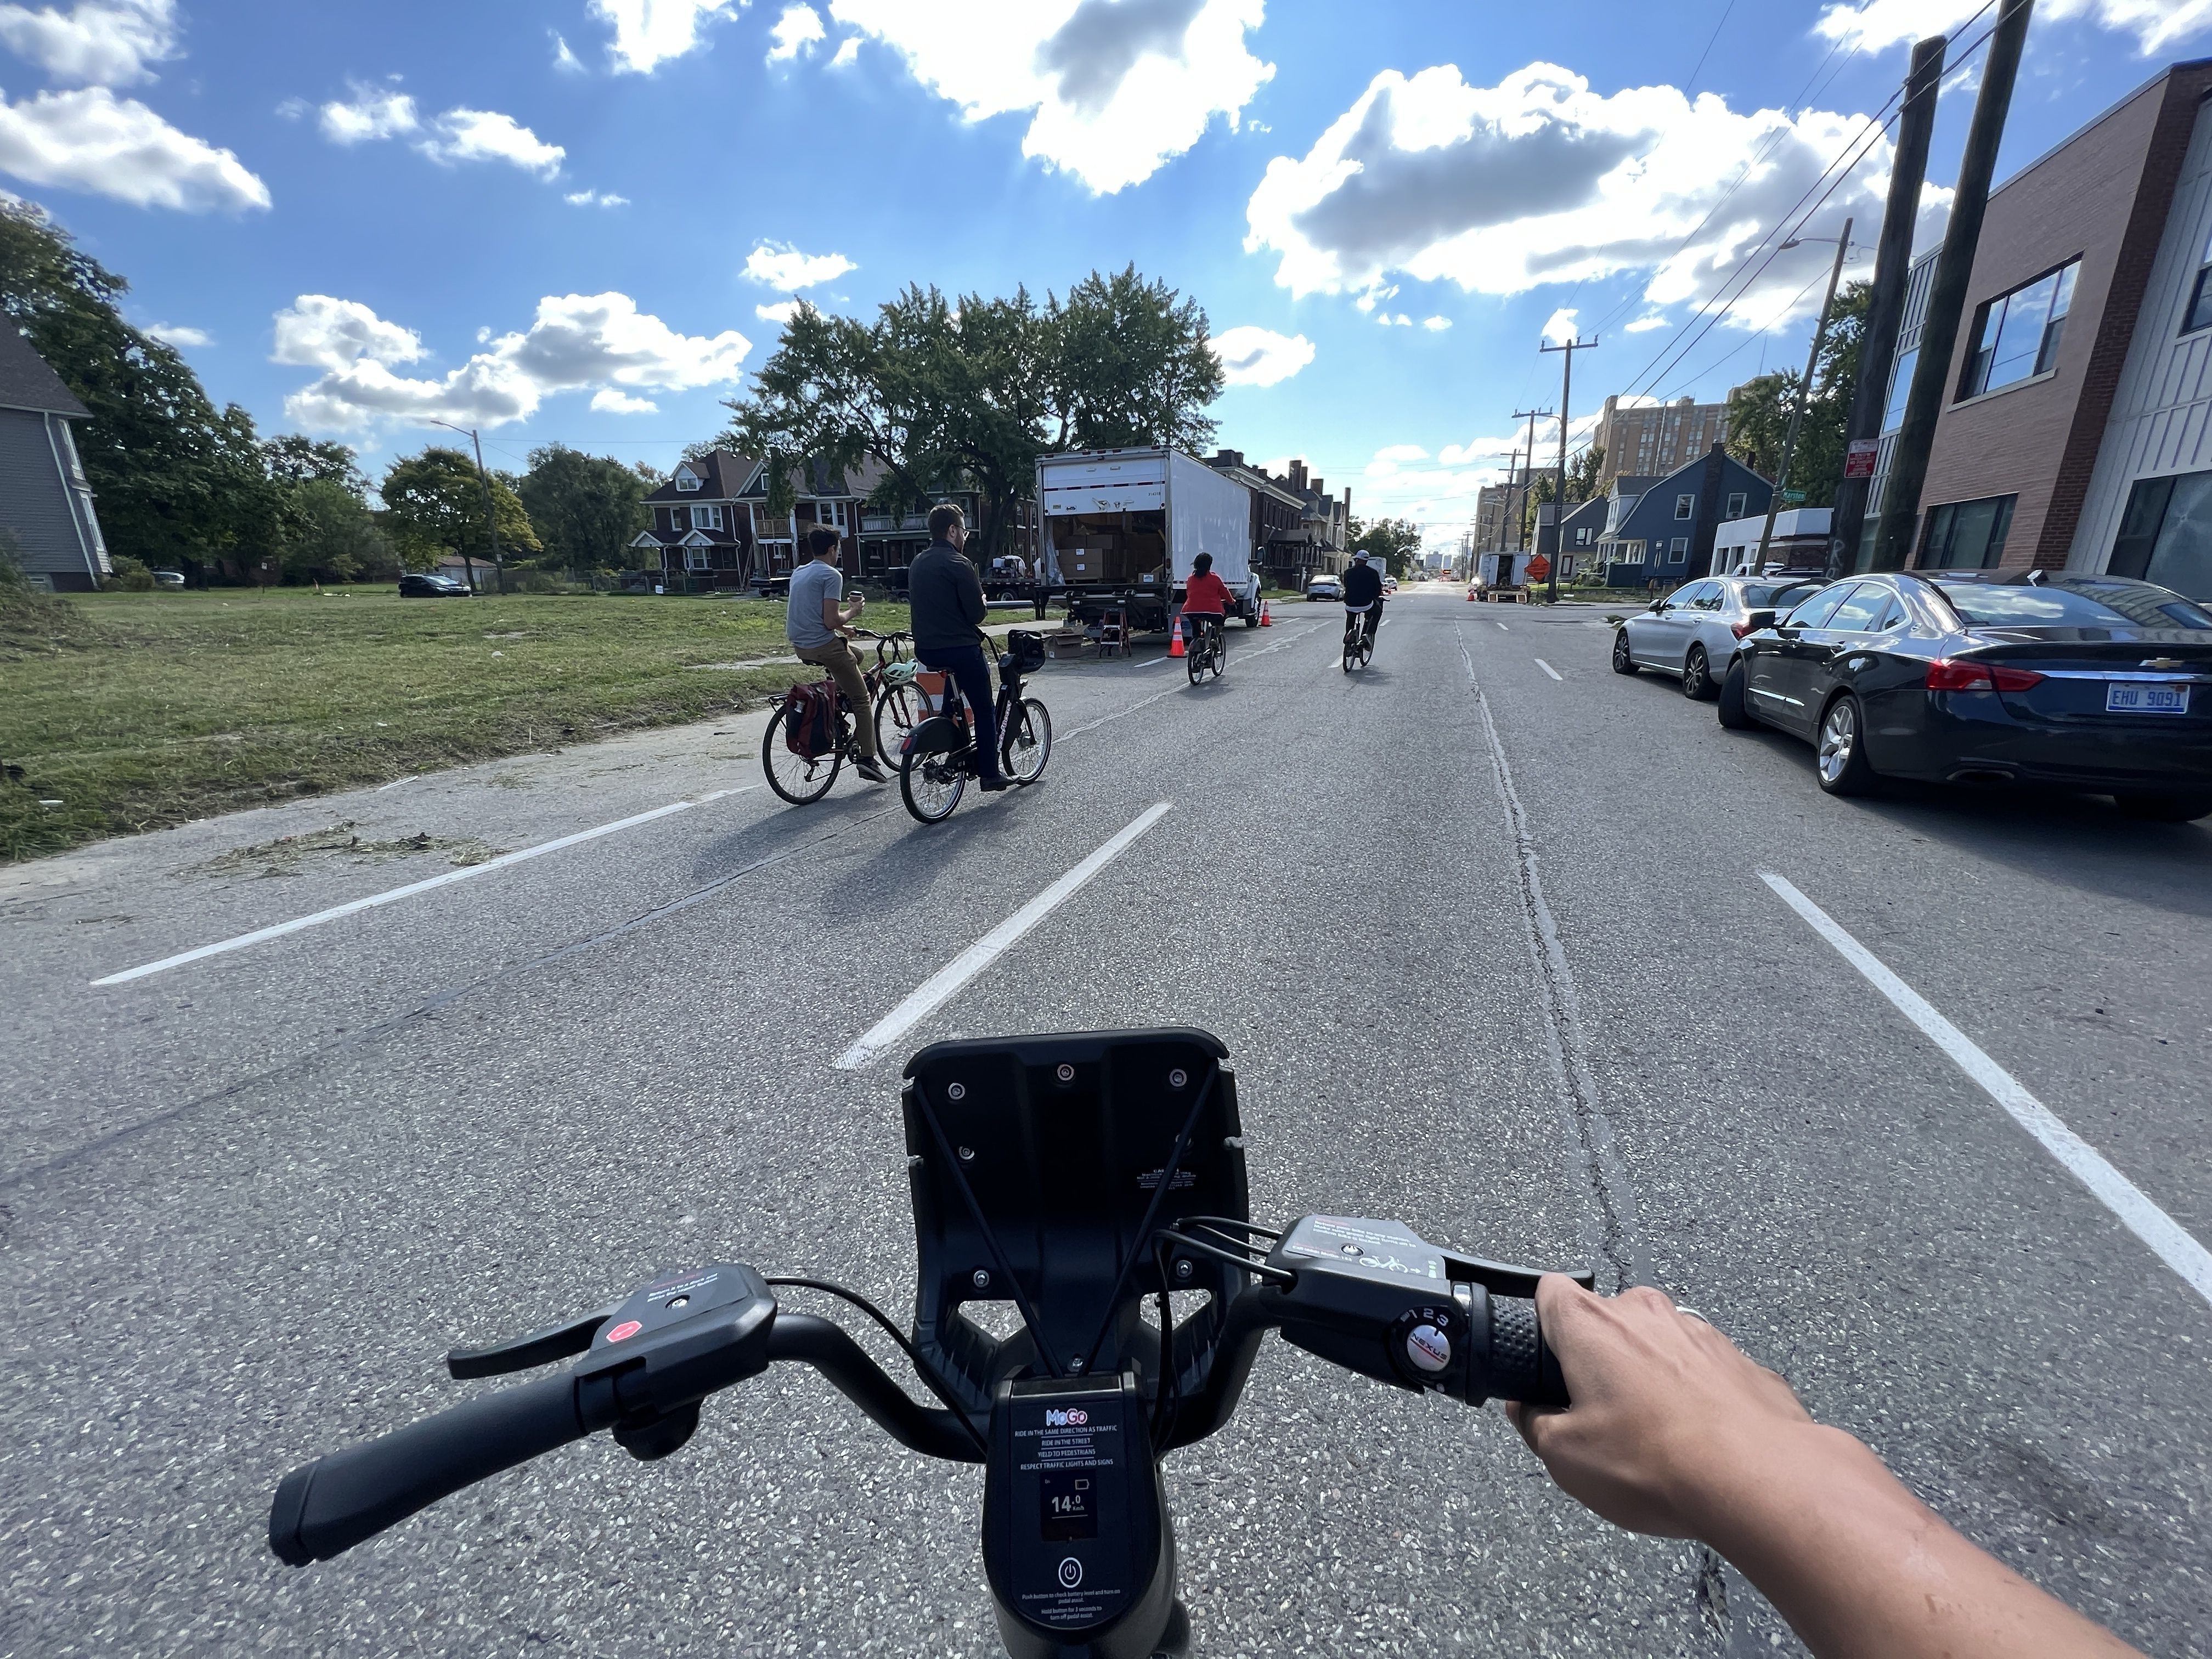 A picture of a MoGo e-bike shown from the perspective of the person riding it. They're rolling down a street with other bikes in front, sun shining, blue sky.